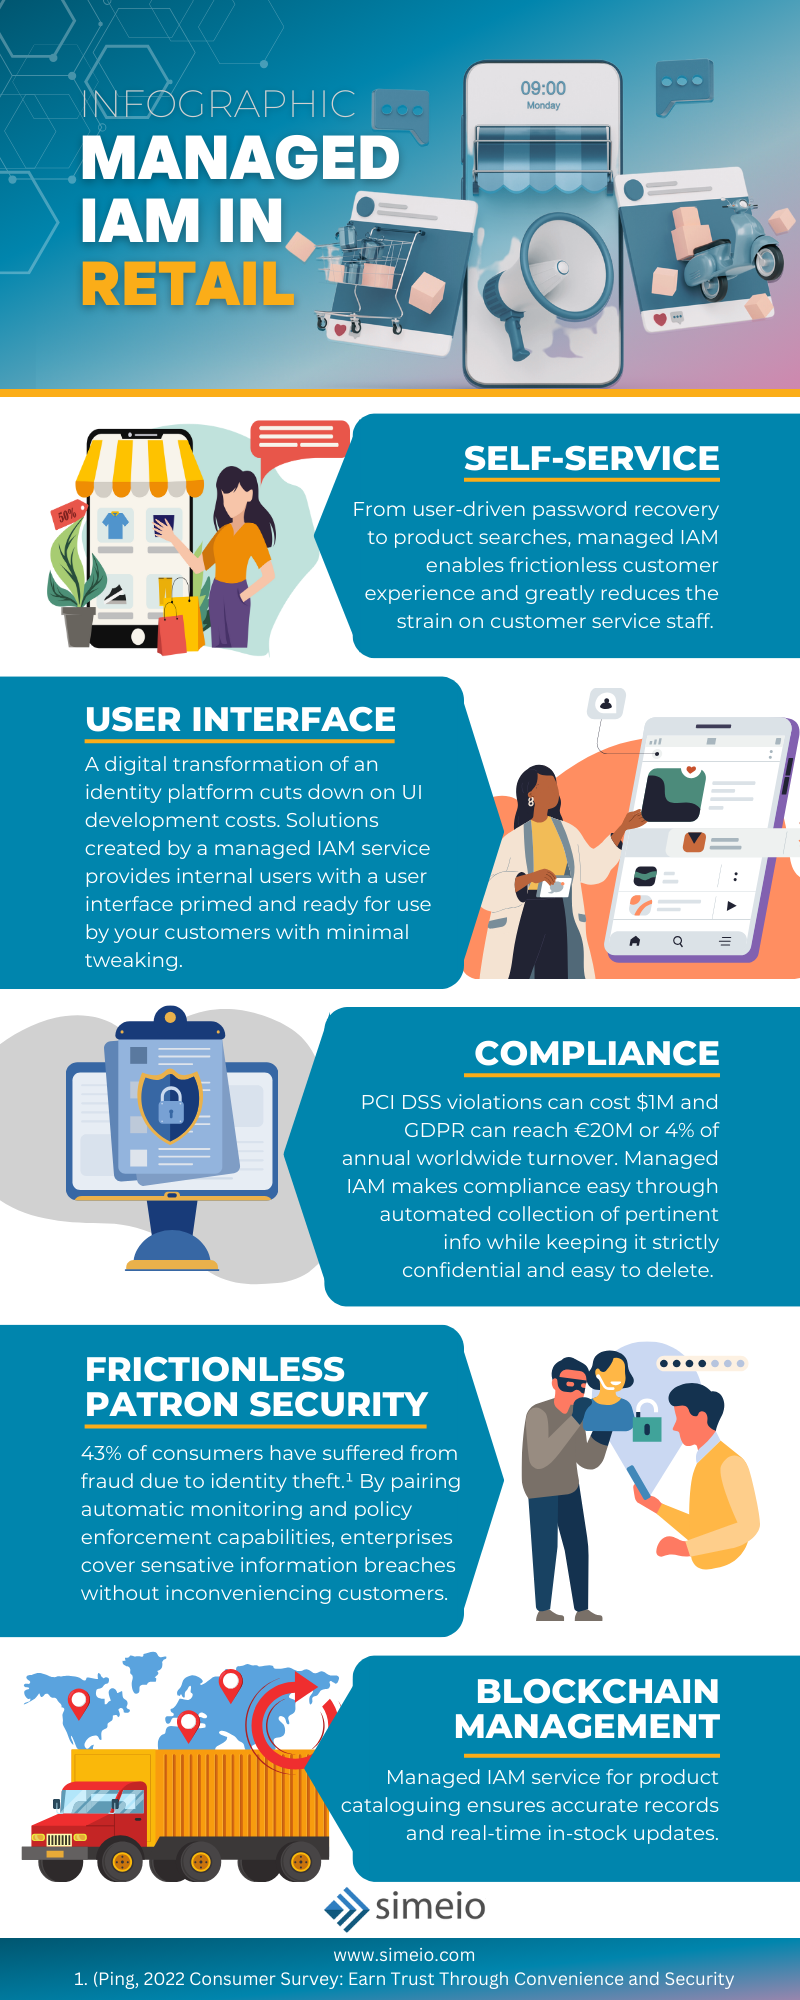 Infographic-Managed-IAM-in-Retail.png